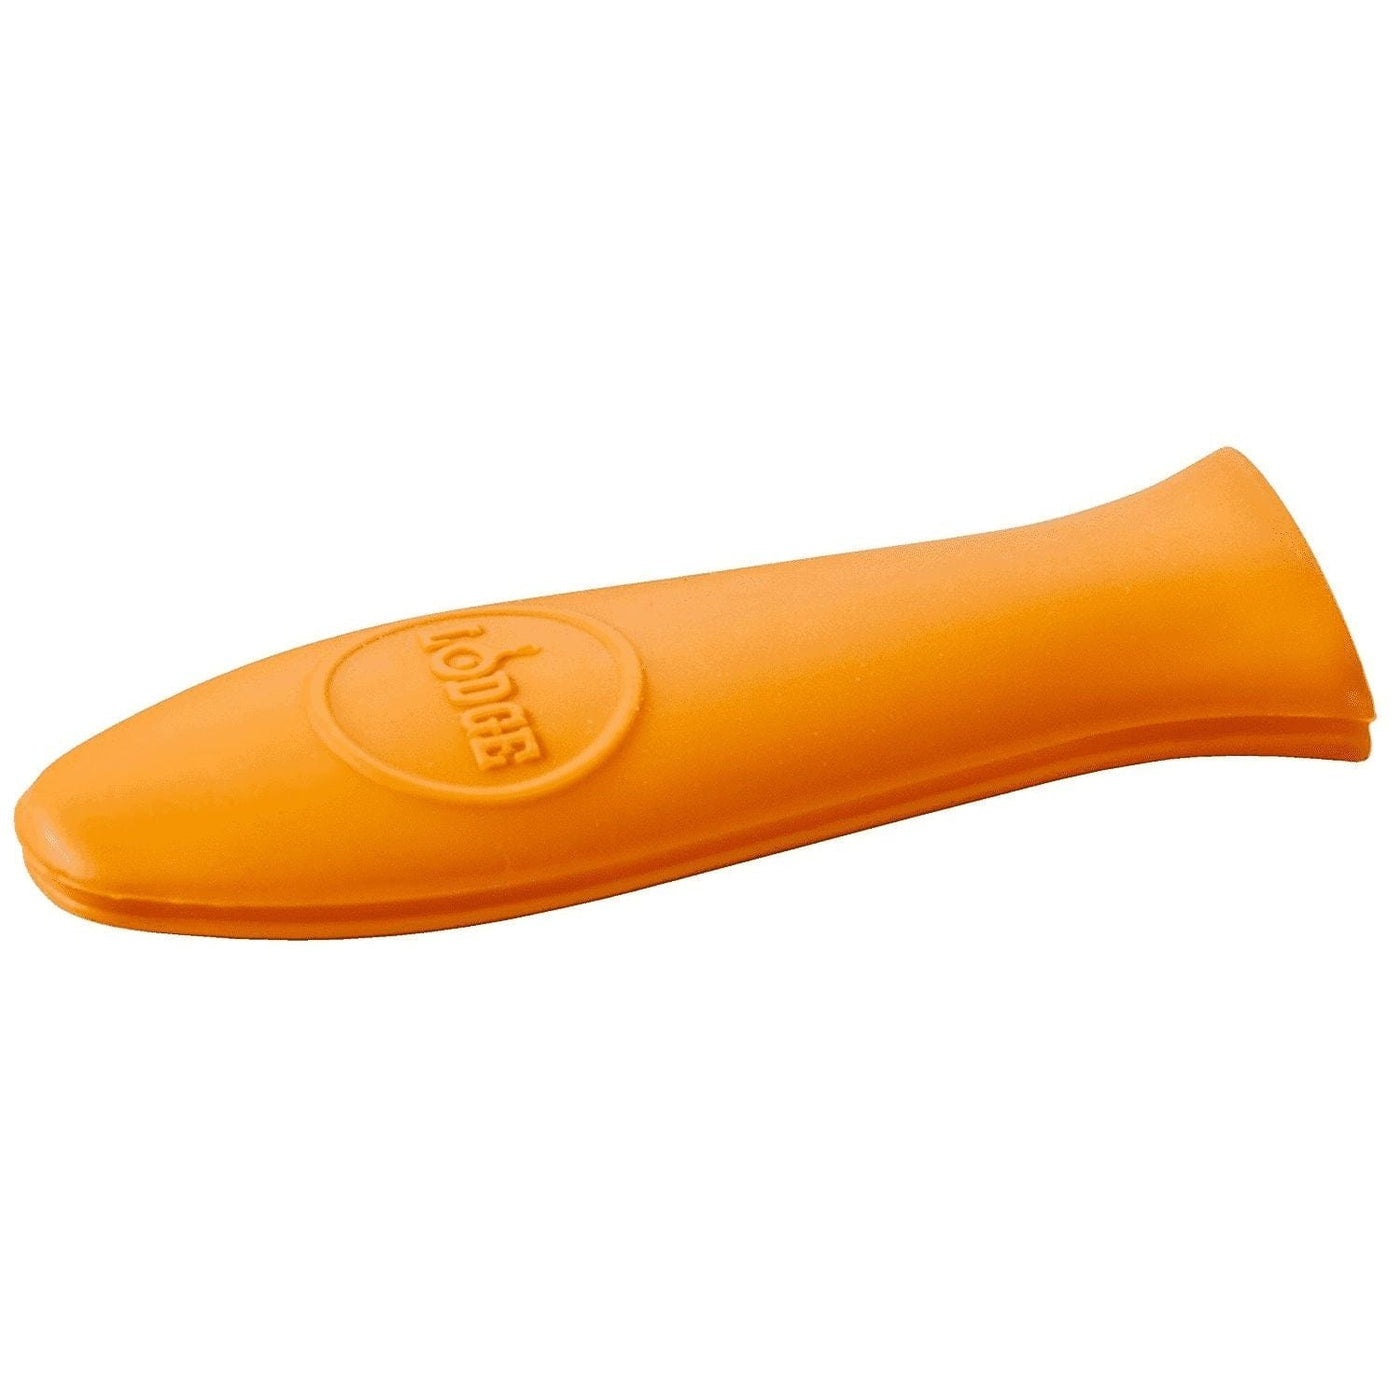 Lodge Cast Iron Lodge ASHH61 Orange Silicone Hot Handle Holder Camping And Outdoor